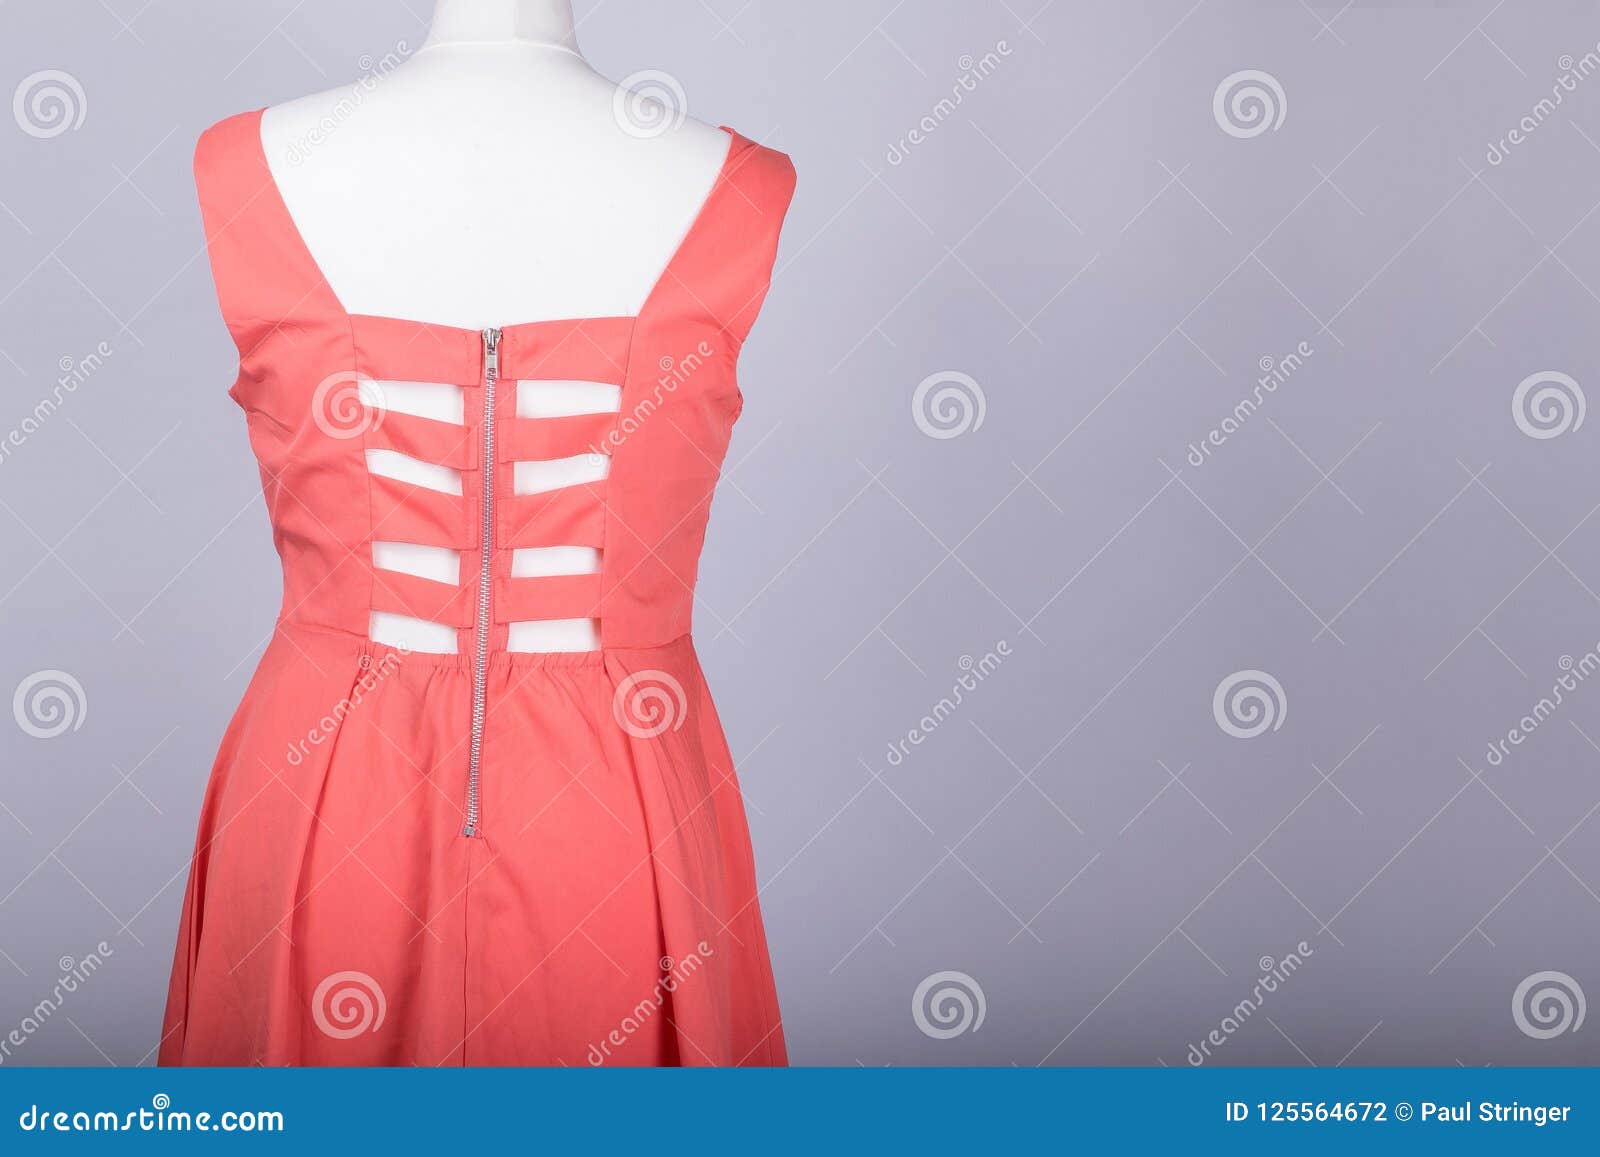 Tailors Mannequin Dressed in a Pink Dress with Strappy Back Stock Photo ...